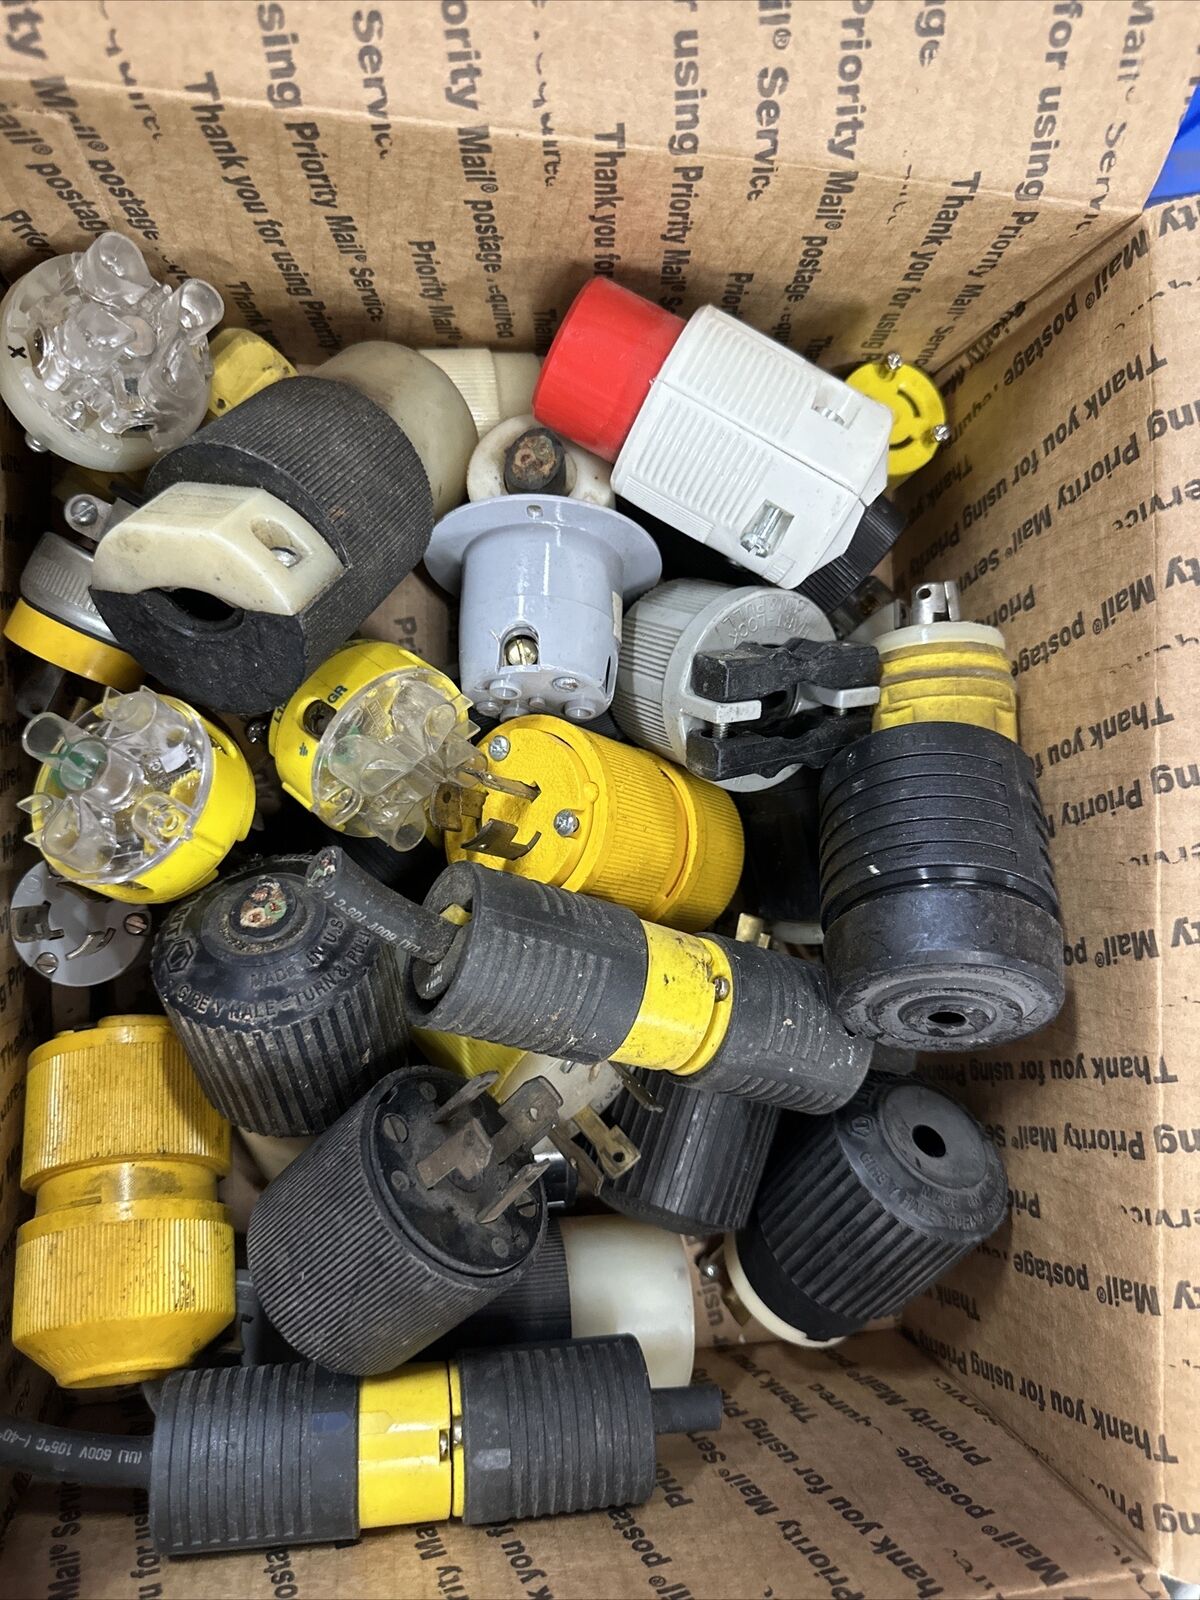 Huge Mix Lot Of Twist Lock Cord Ends. Male And Female. Hubble, Leviton, More